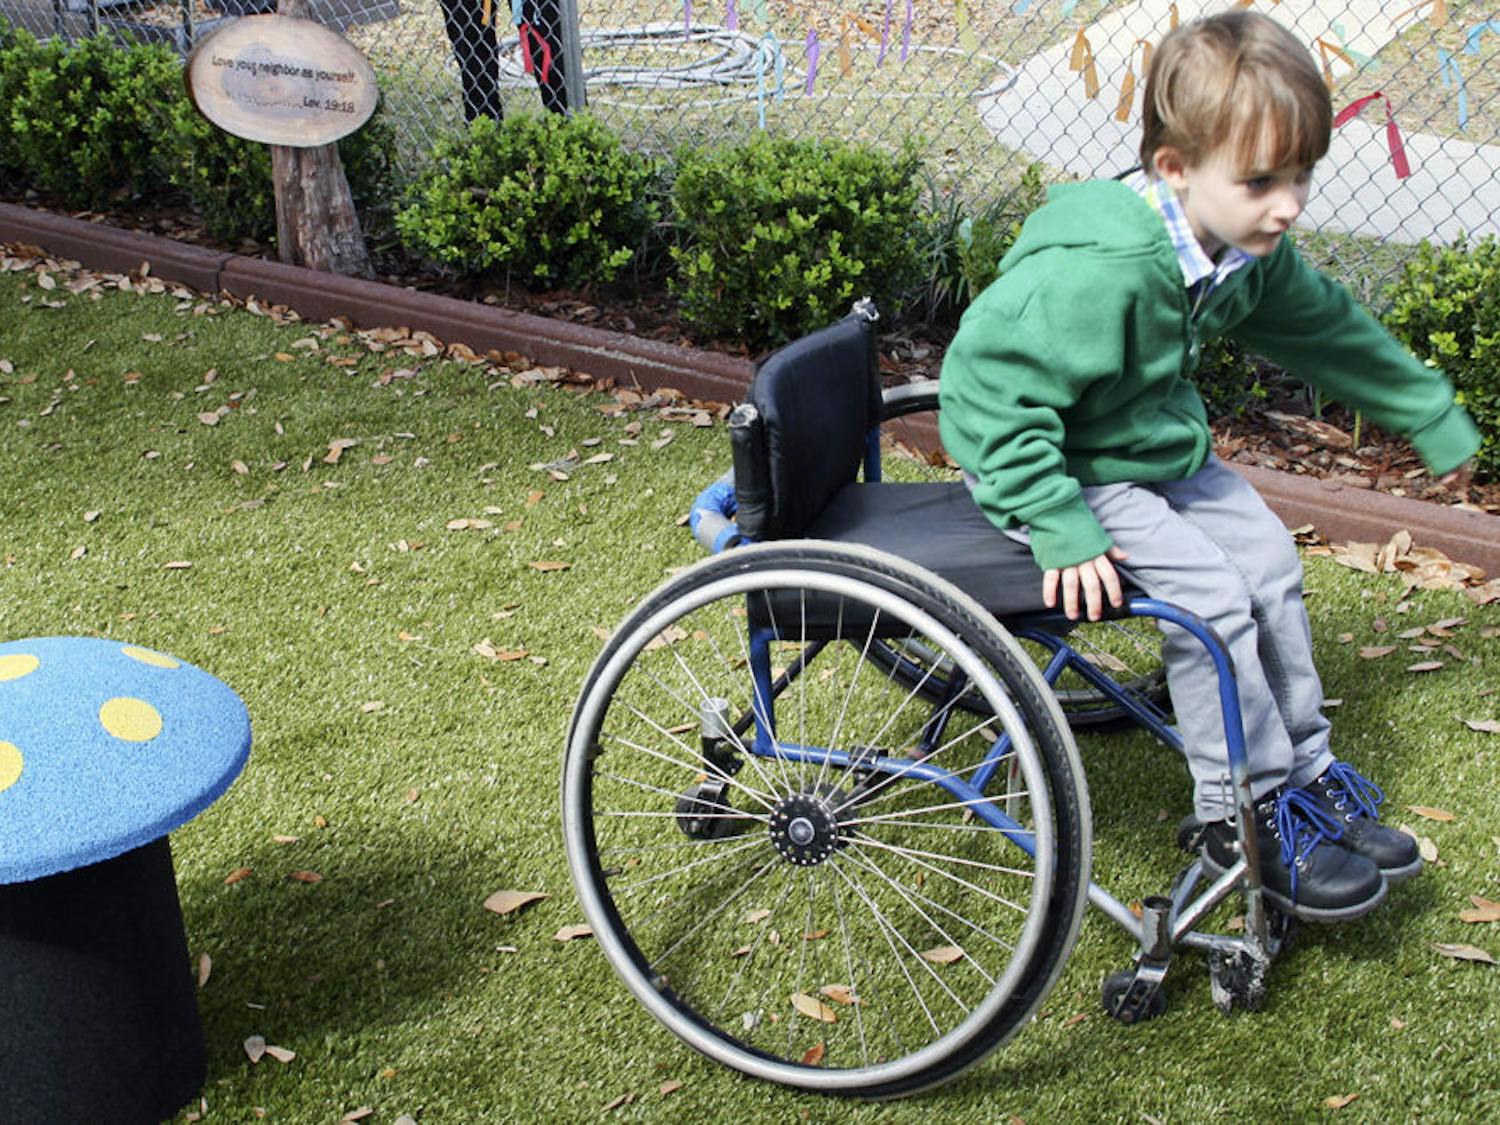 Ryan, 6, rides a wheelchair in the Trinity United Methodist Church playground Sunday afternoon. Though he was not disabled himself, the wheelchair allowed Ryan to test the park’s accessibility for wheelchair users.